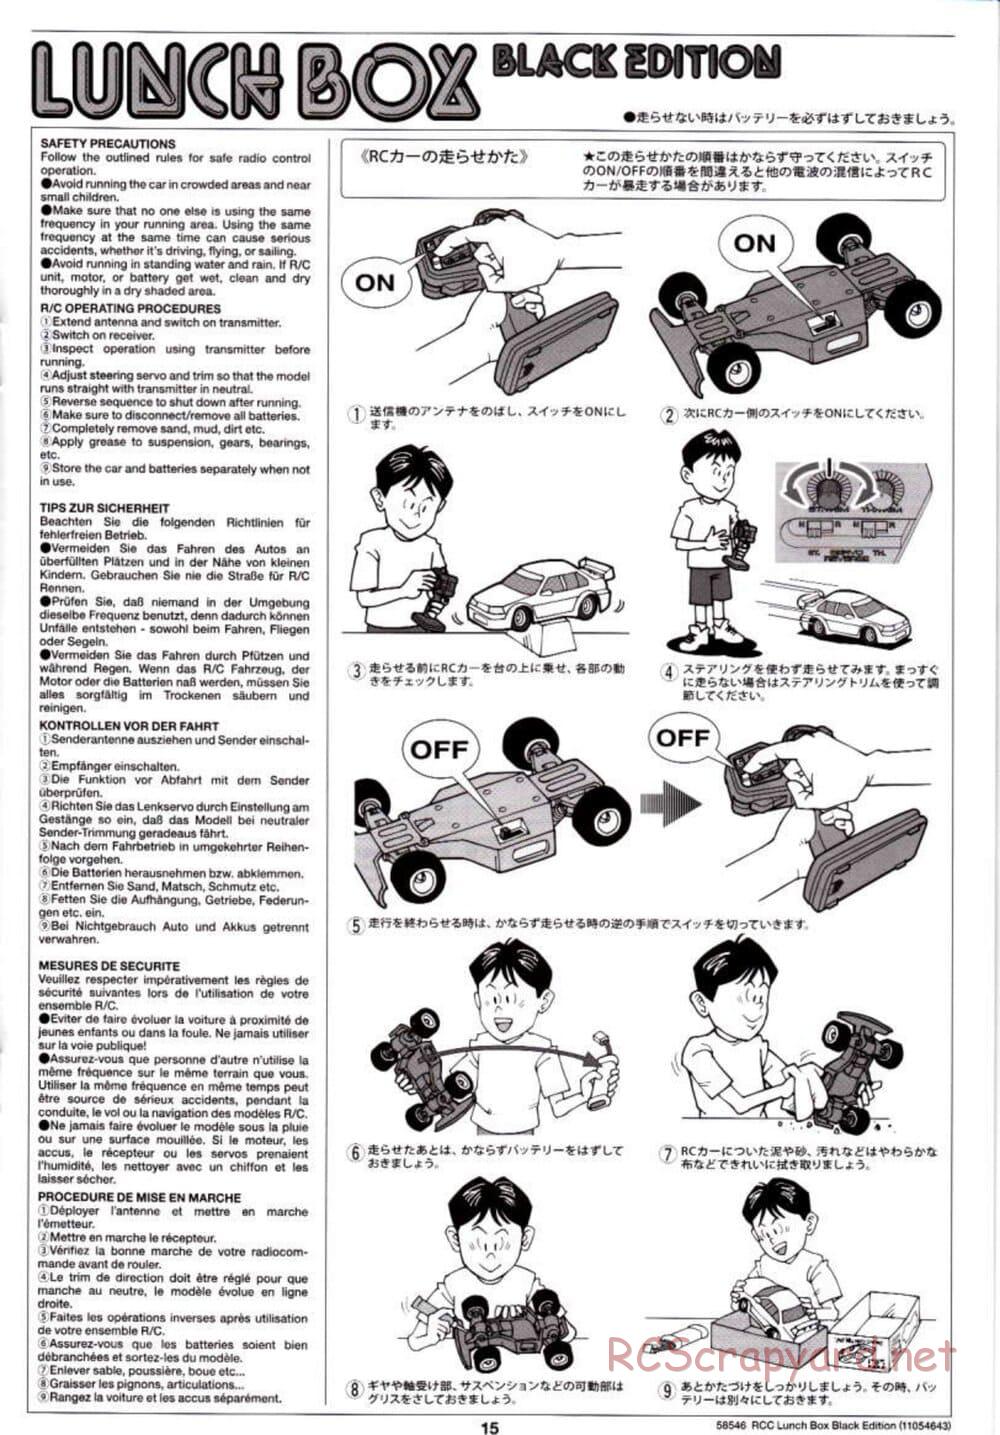 Tamiya - Lunch Box - Black Edition - CW-01 Chassis - Manual - Page 15